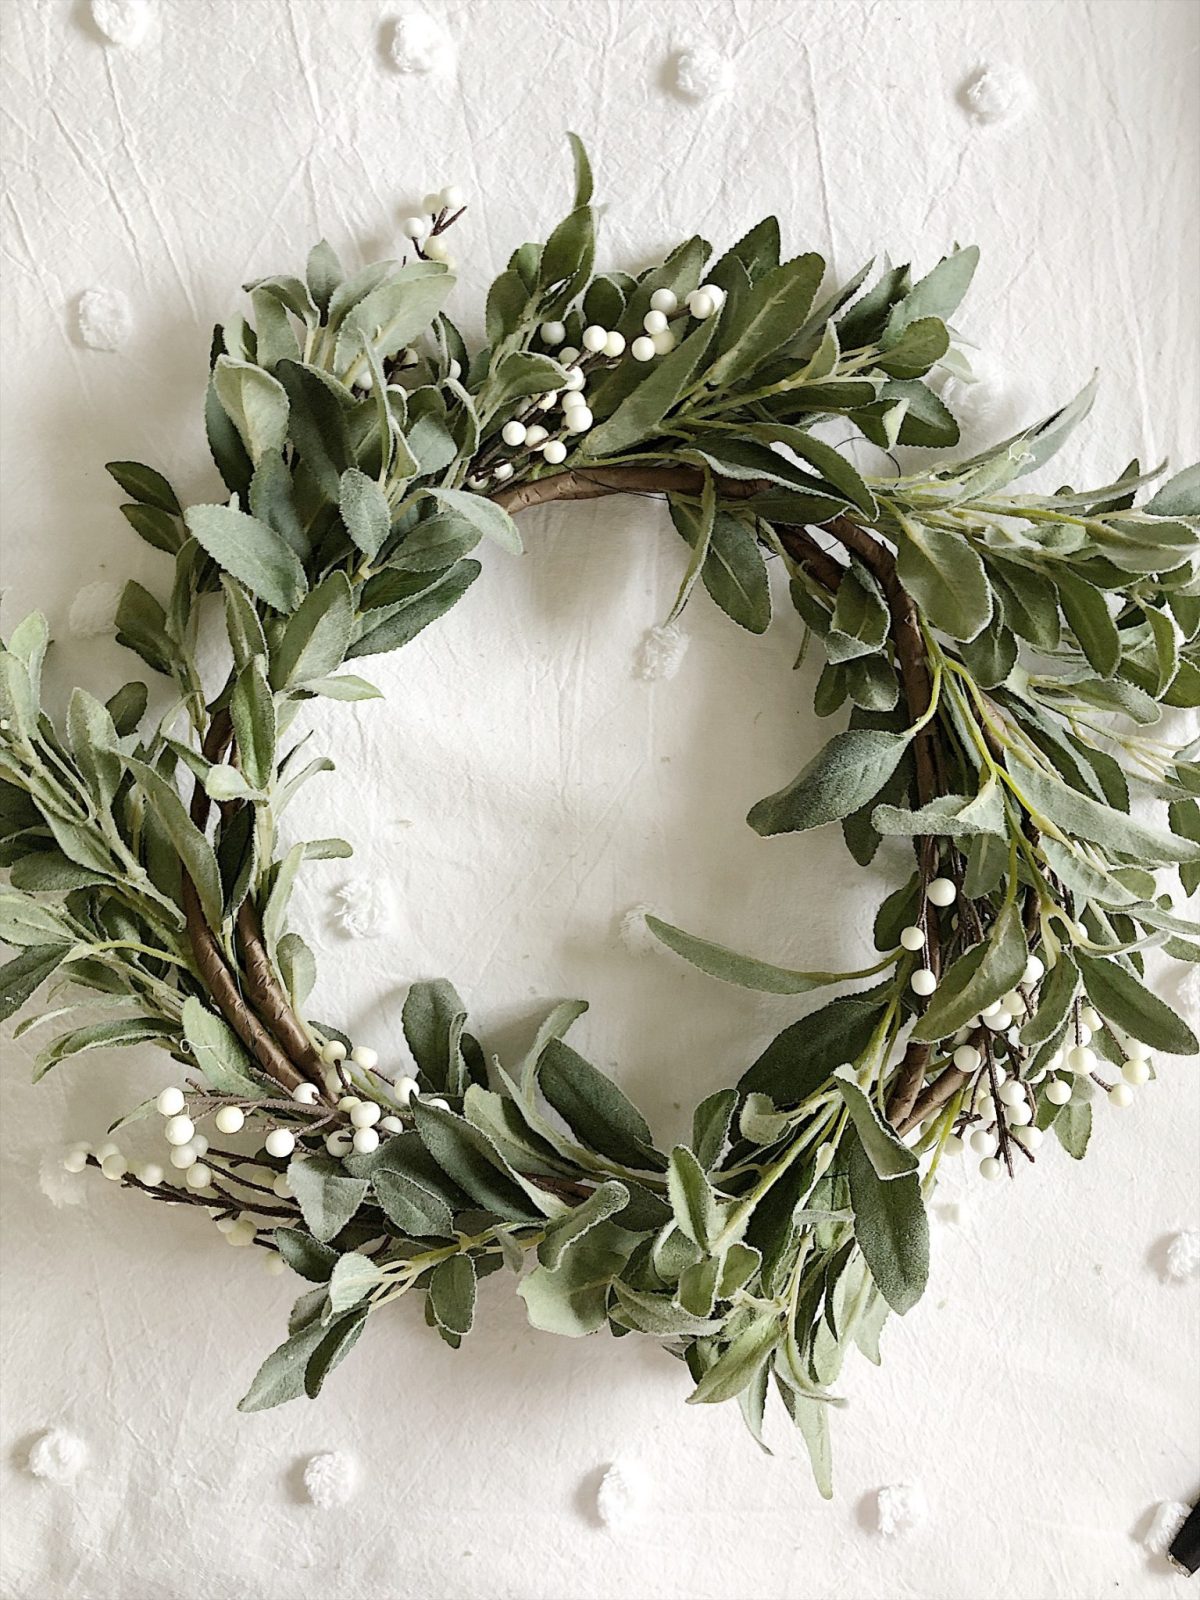 How to Make a Christmas Wreath DIY and Blog Hop - MY 100 YEAR OLD HOME